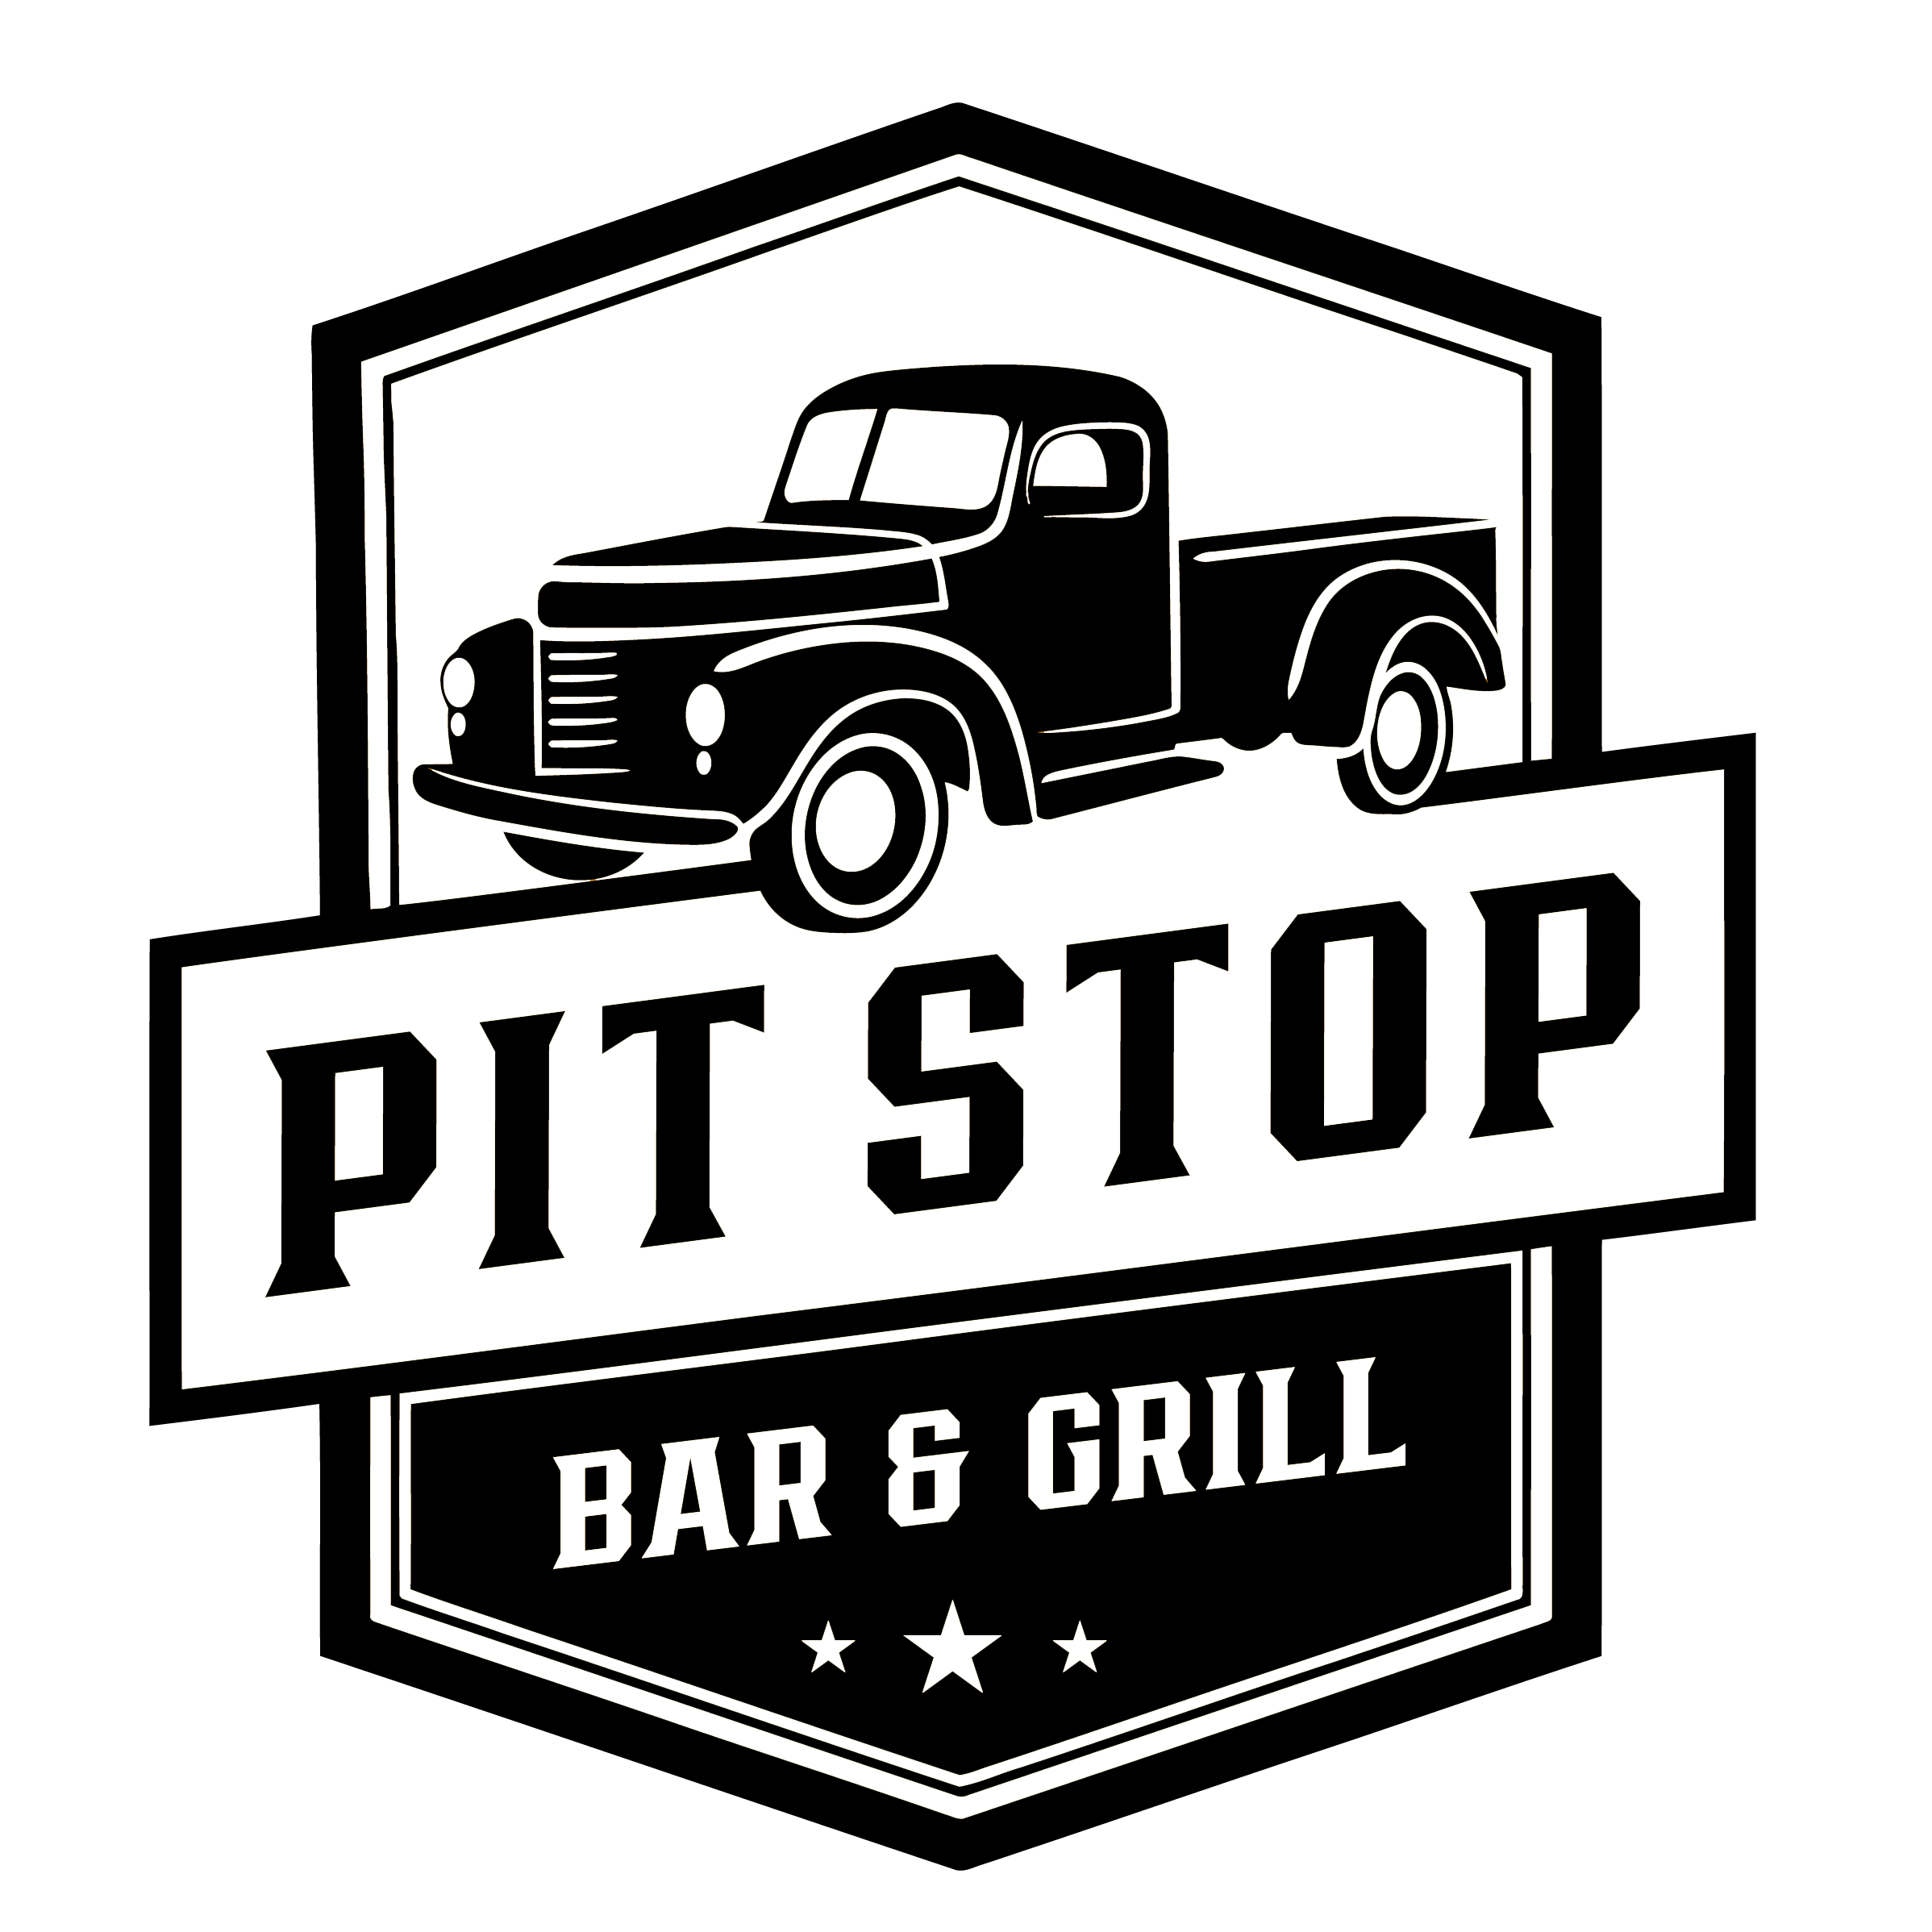 Pit Stop Bar & Grill